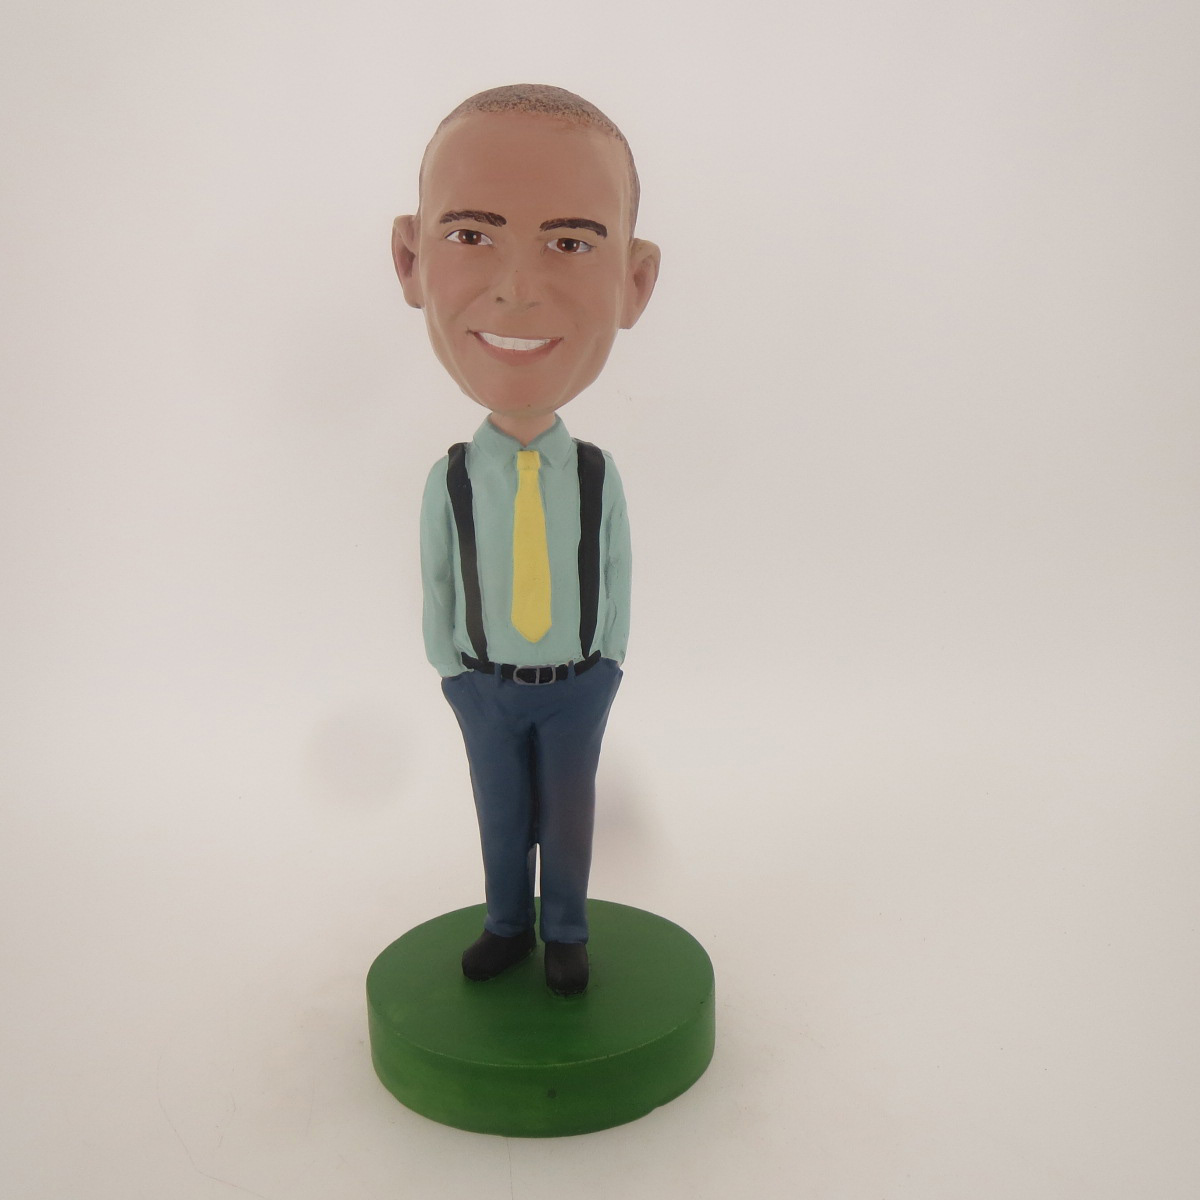 Picture of Custom Bobblehead Doll: Casual Man With A Yellow Tie